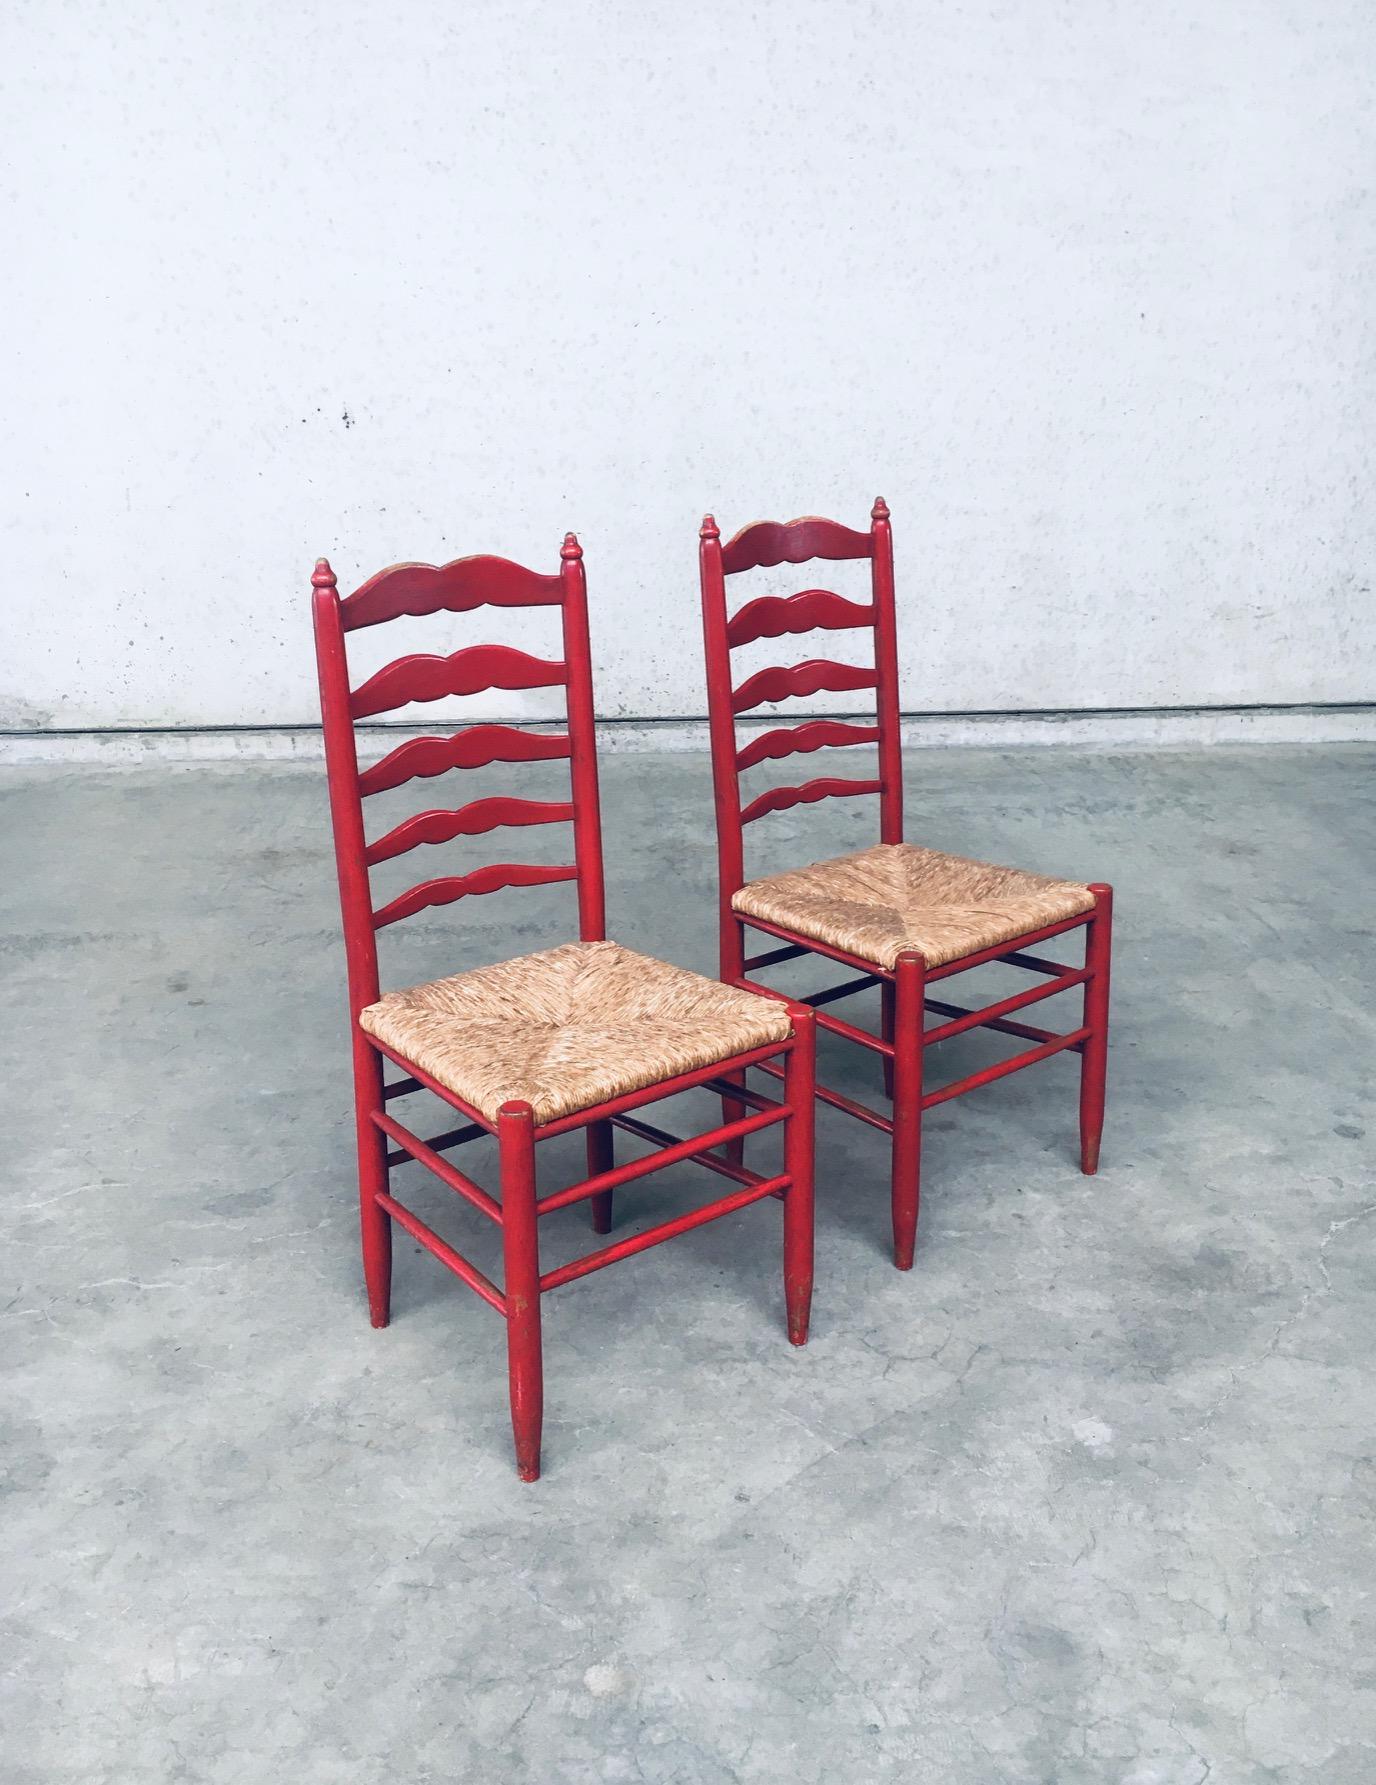 Vintage Rustic High Ladder Back Red Lacquered Wood & Rush Chair set. Made in France, 1930's period. Classic design high ladder back chairs with Moustache shaped spindles on the high back rest. Red lacquered wooden frame shows lot's of signs of their